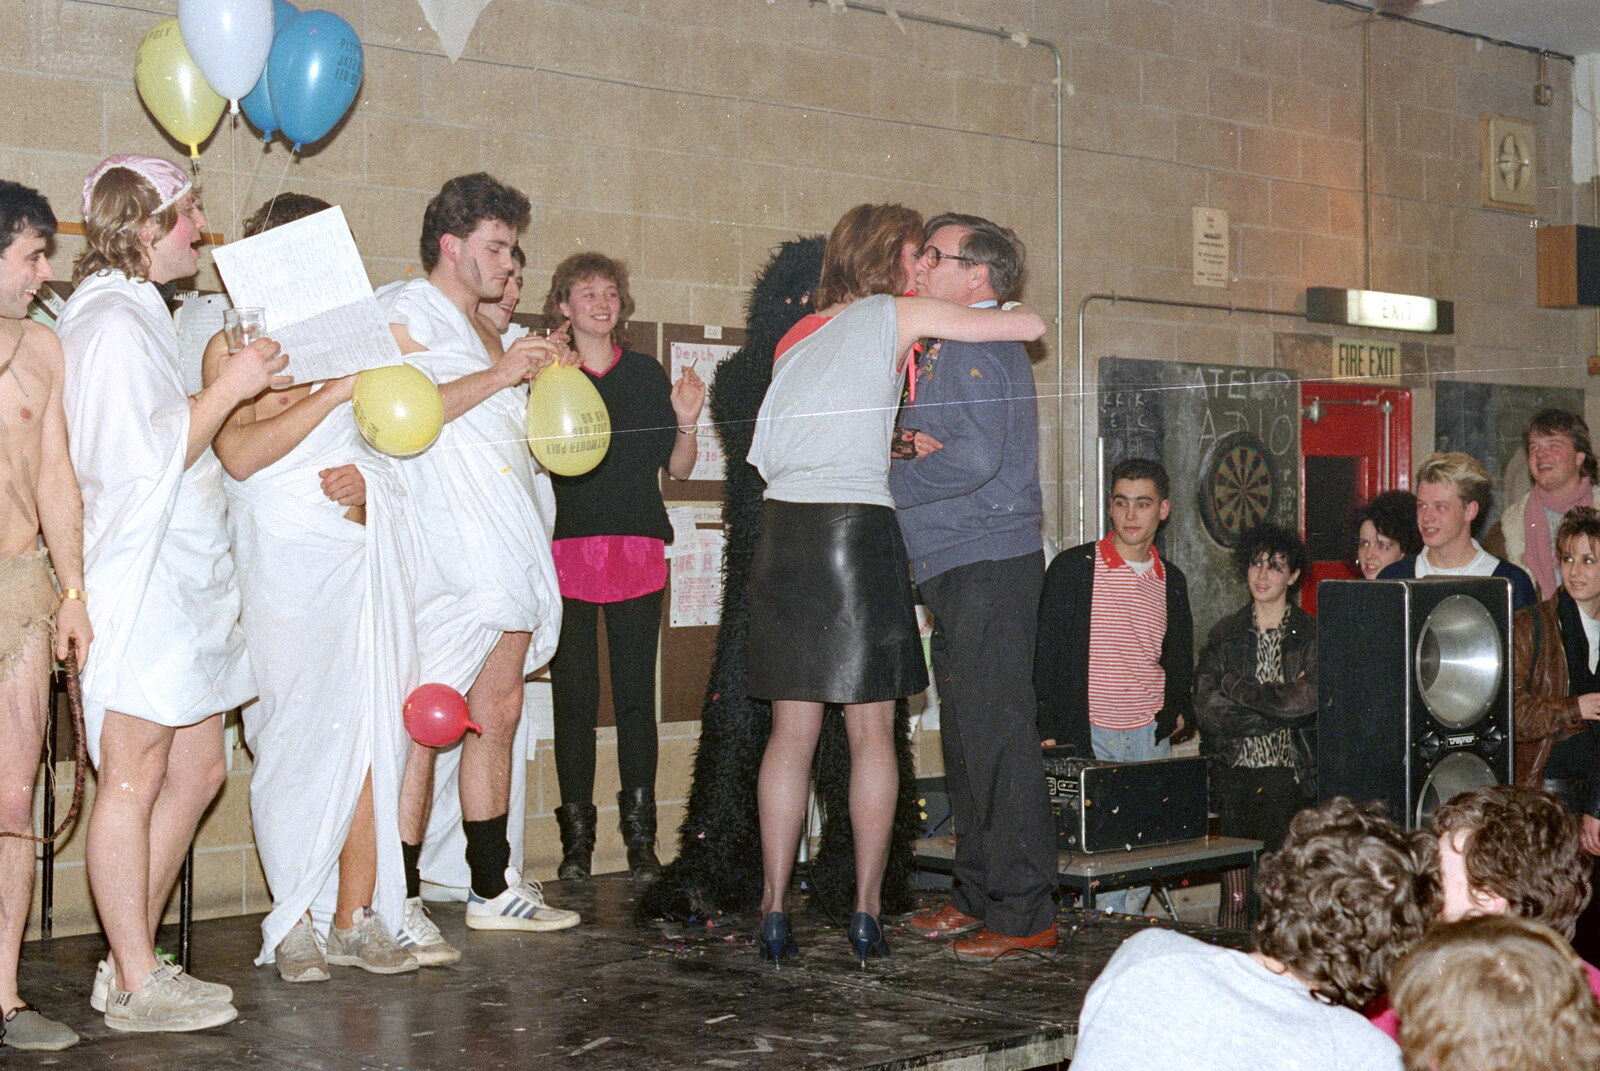 Roy gets a hug from Uni: The PPSU "Jazz" RAG Review and Charity Auction, Plymouth, Devon - 19th February 1986